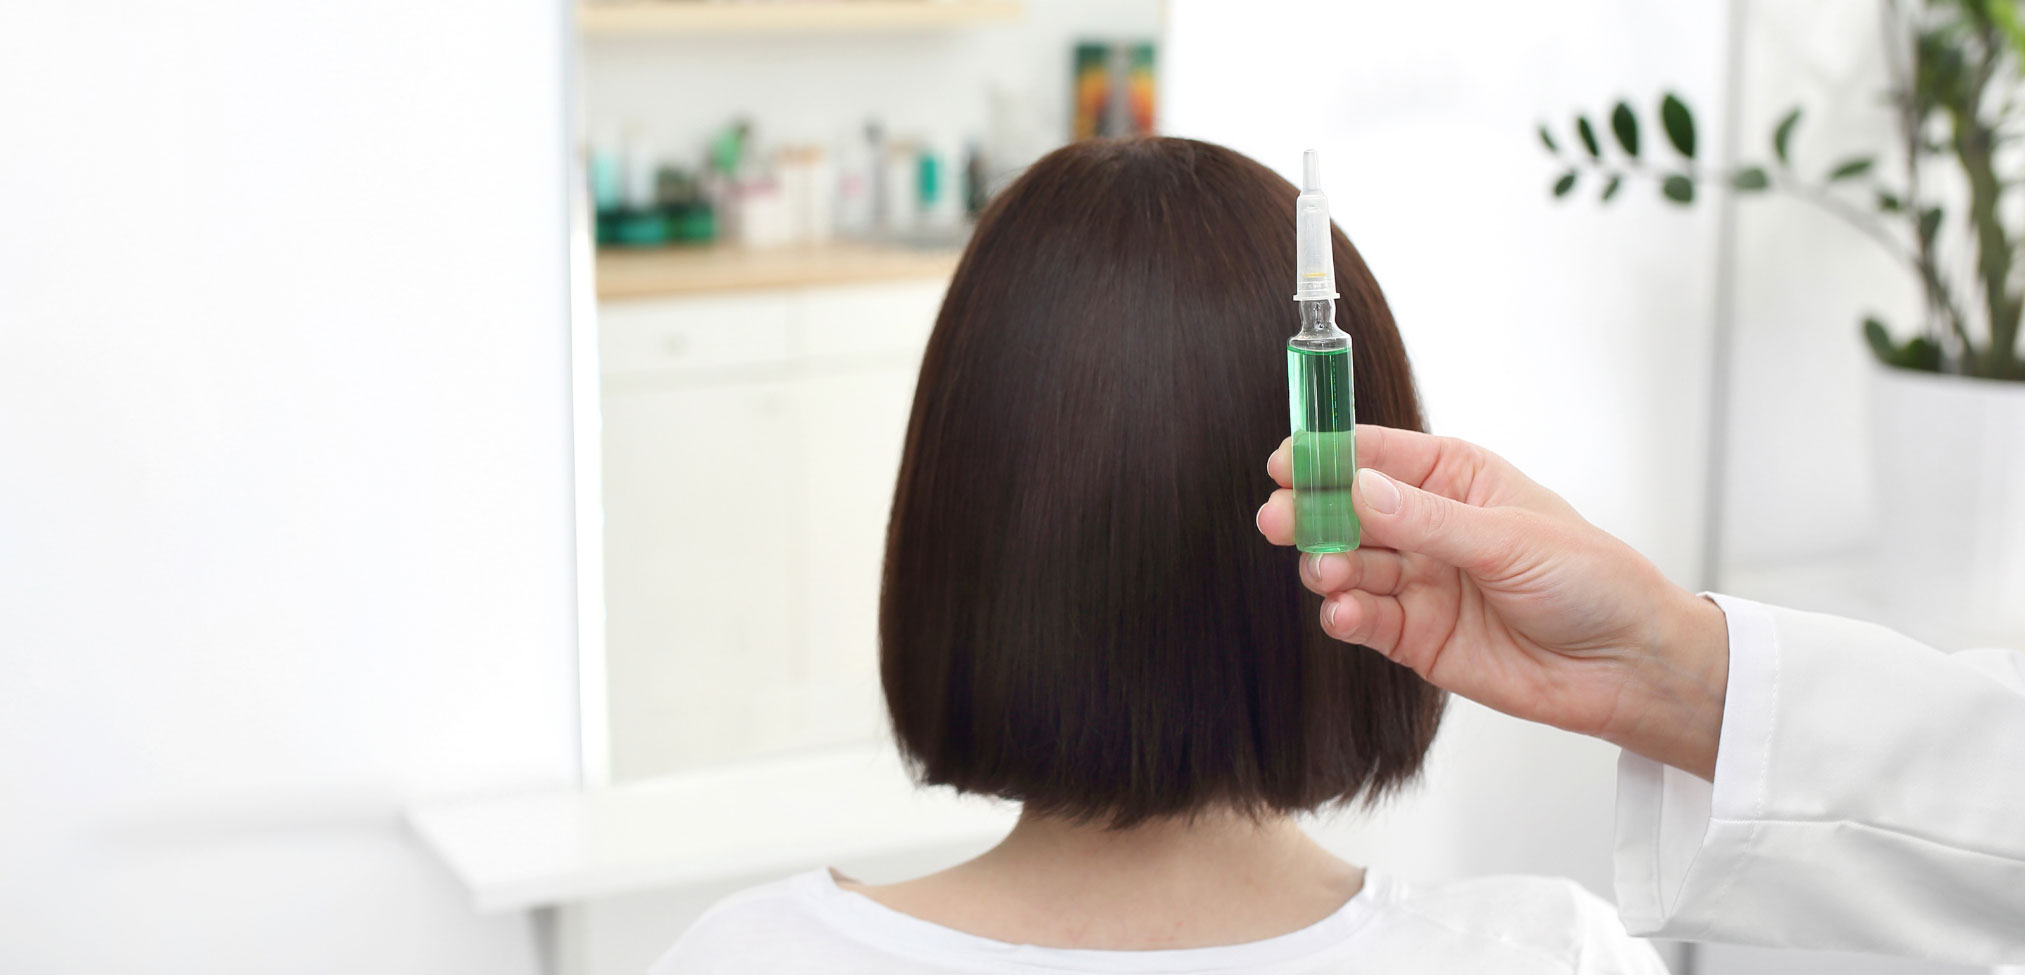 What Is a Hair Ampoule?